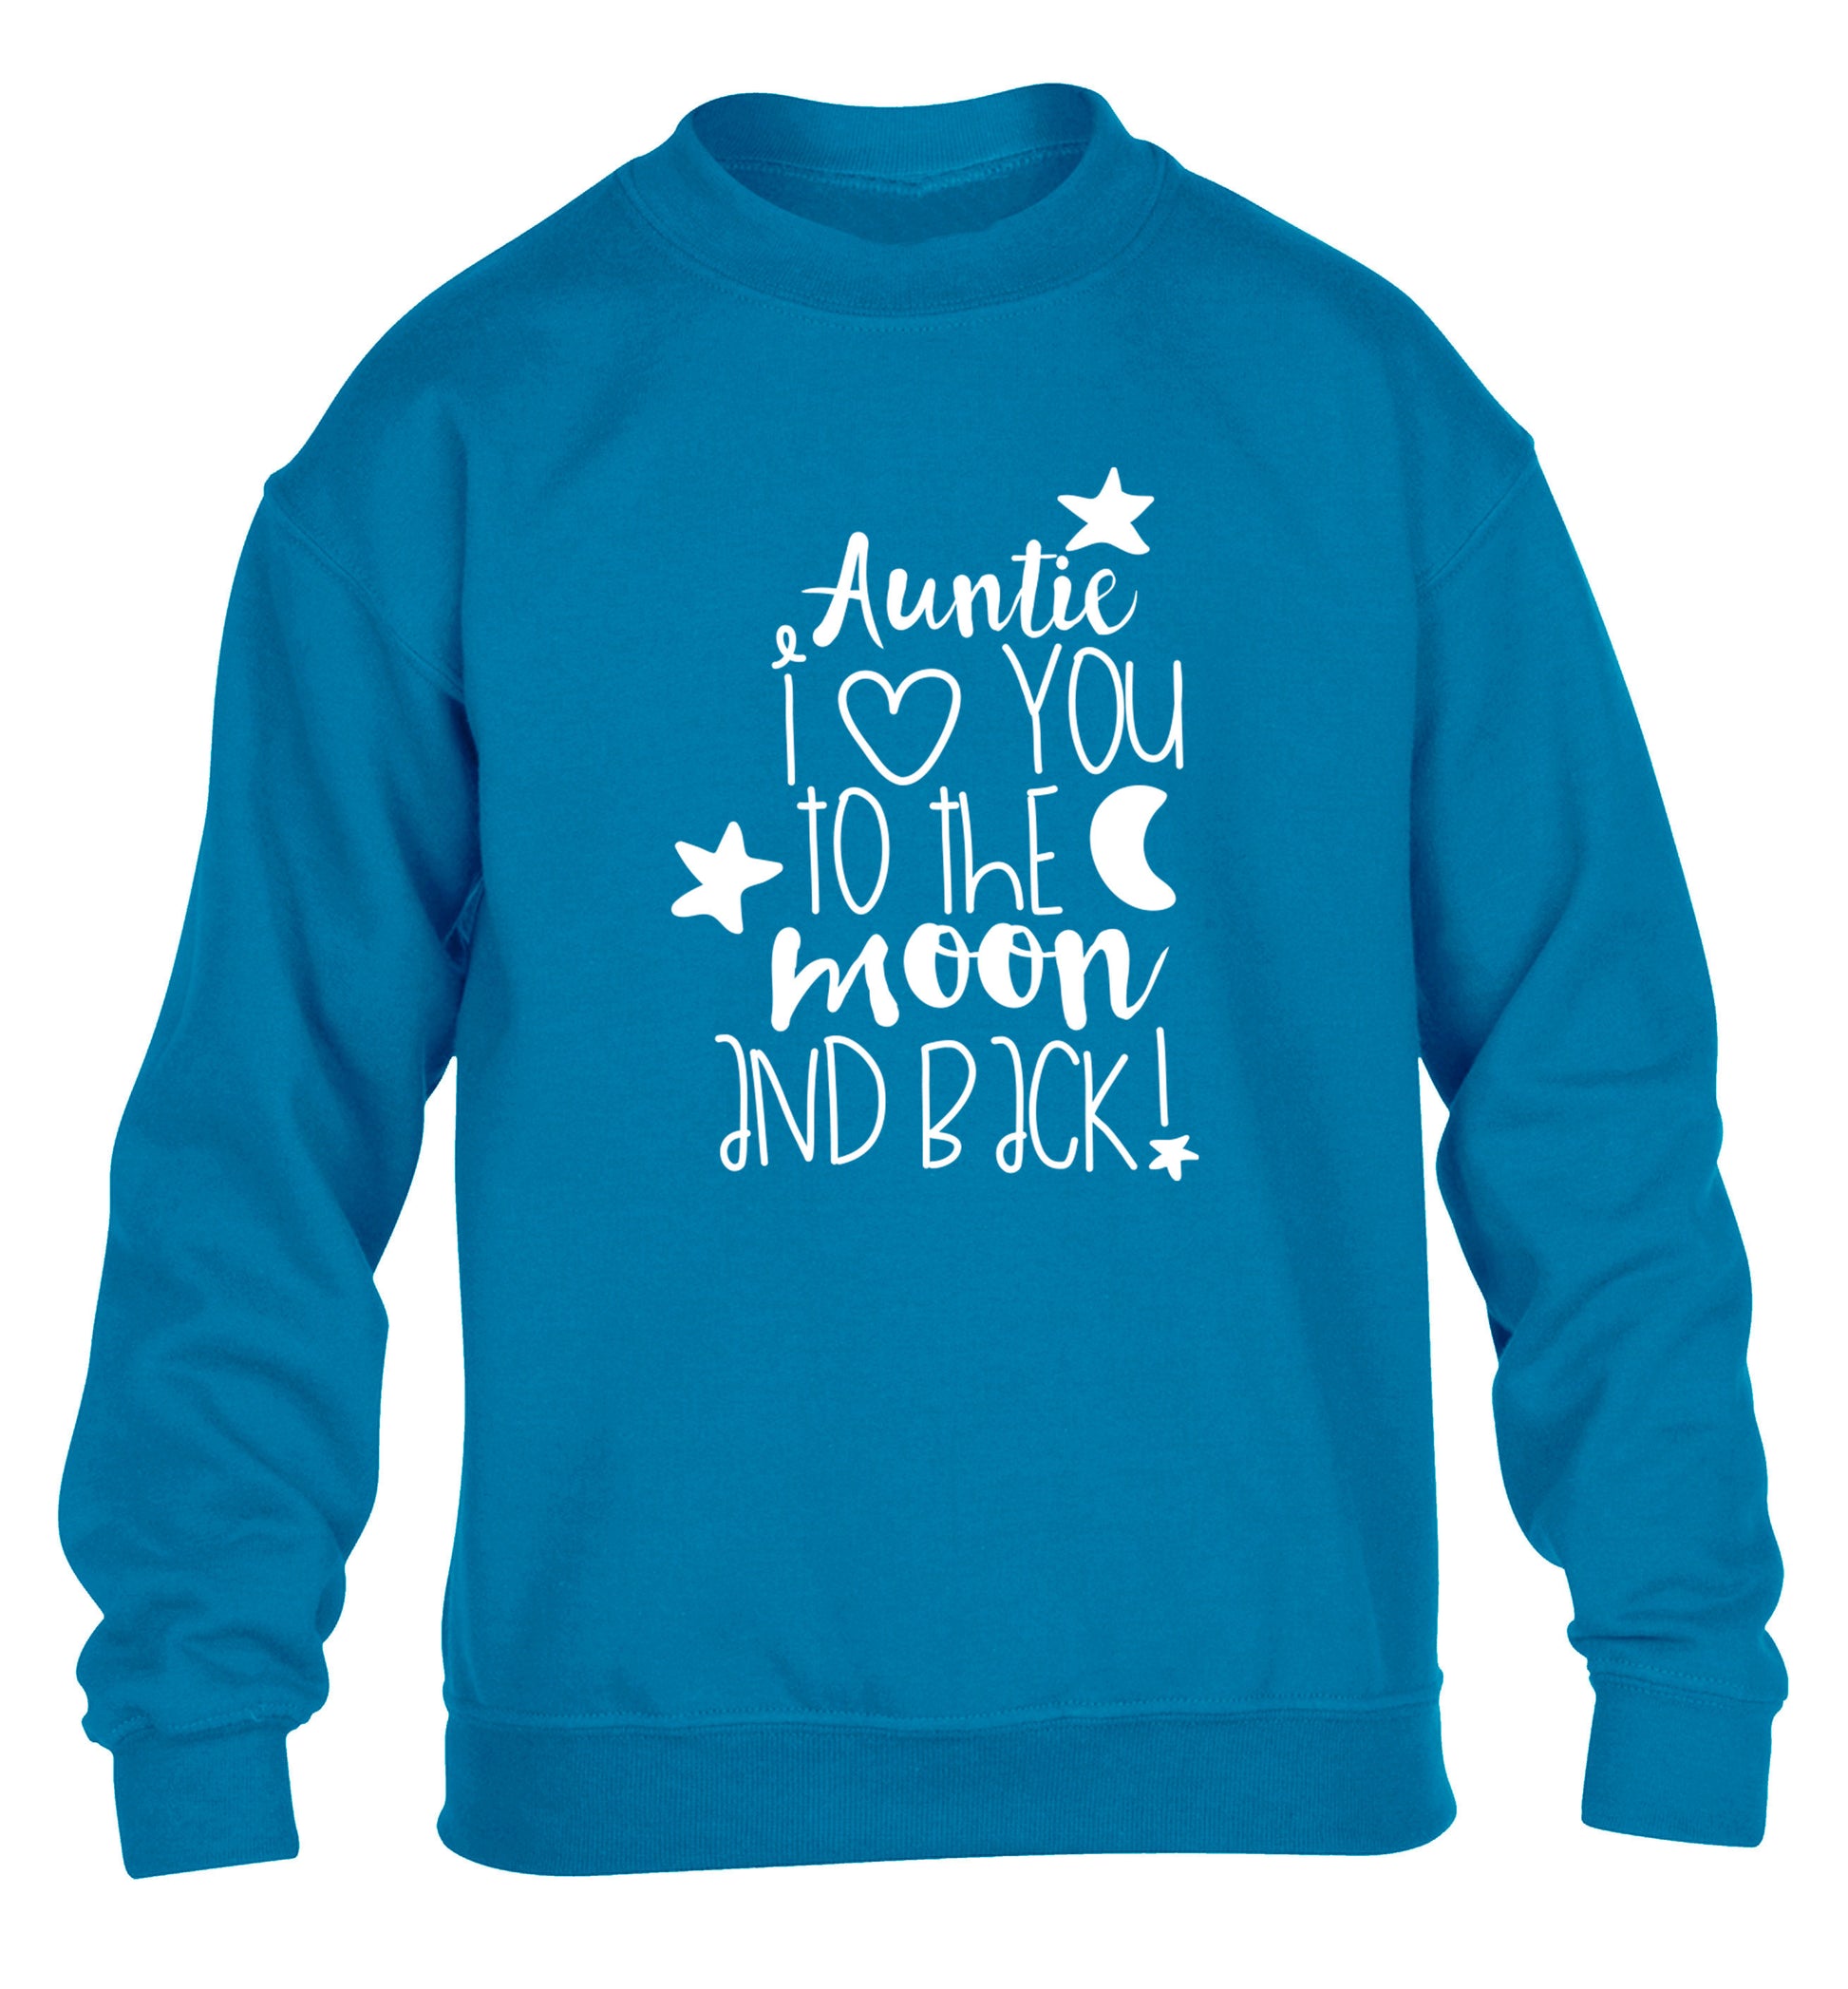 Auntie I love you to the moon and back children's blue  sweater 12-14 Years